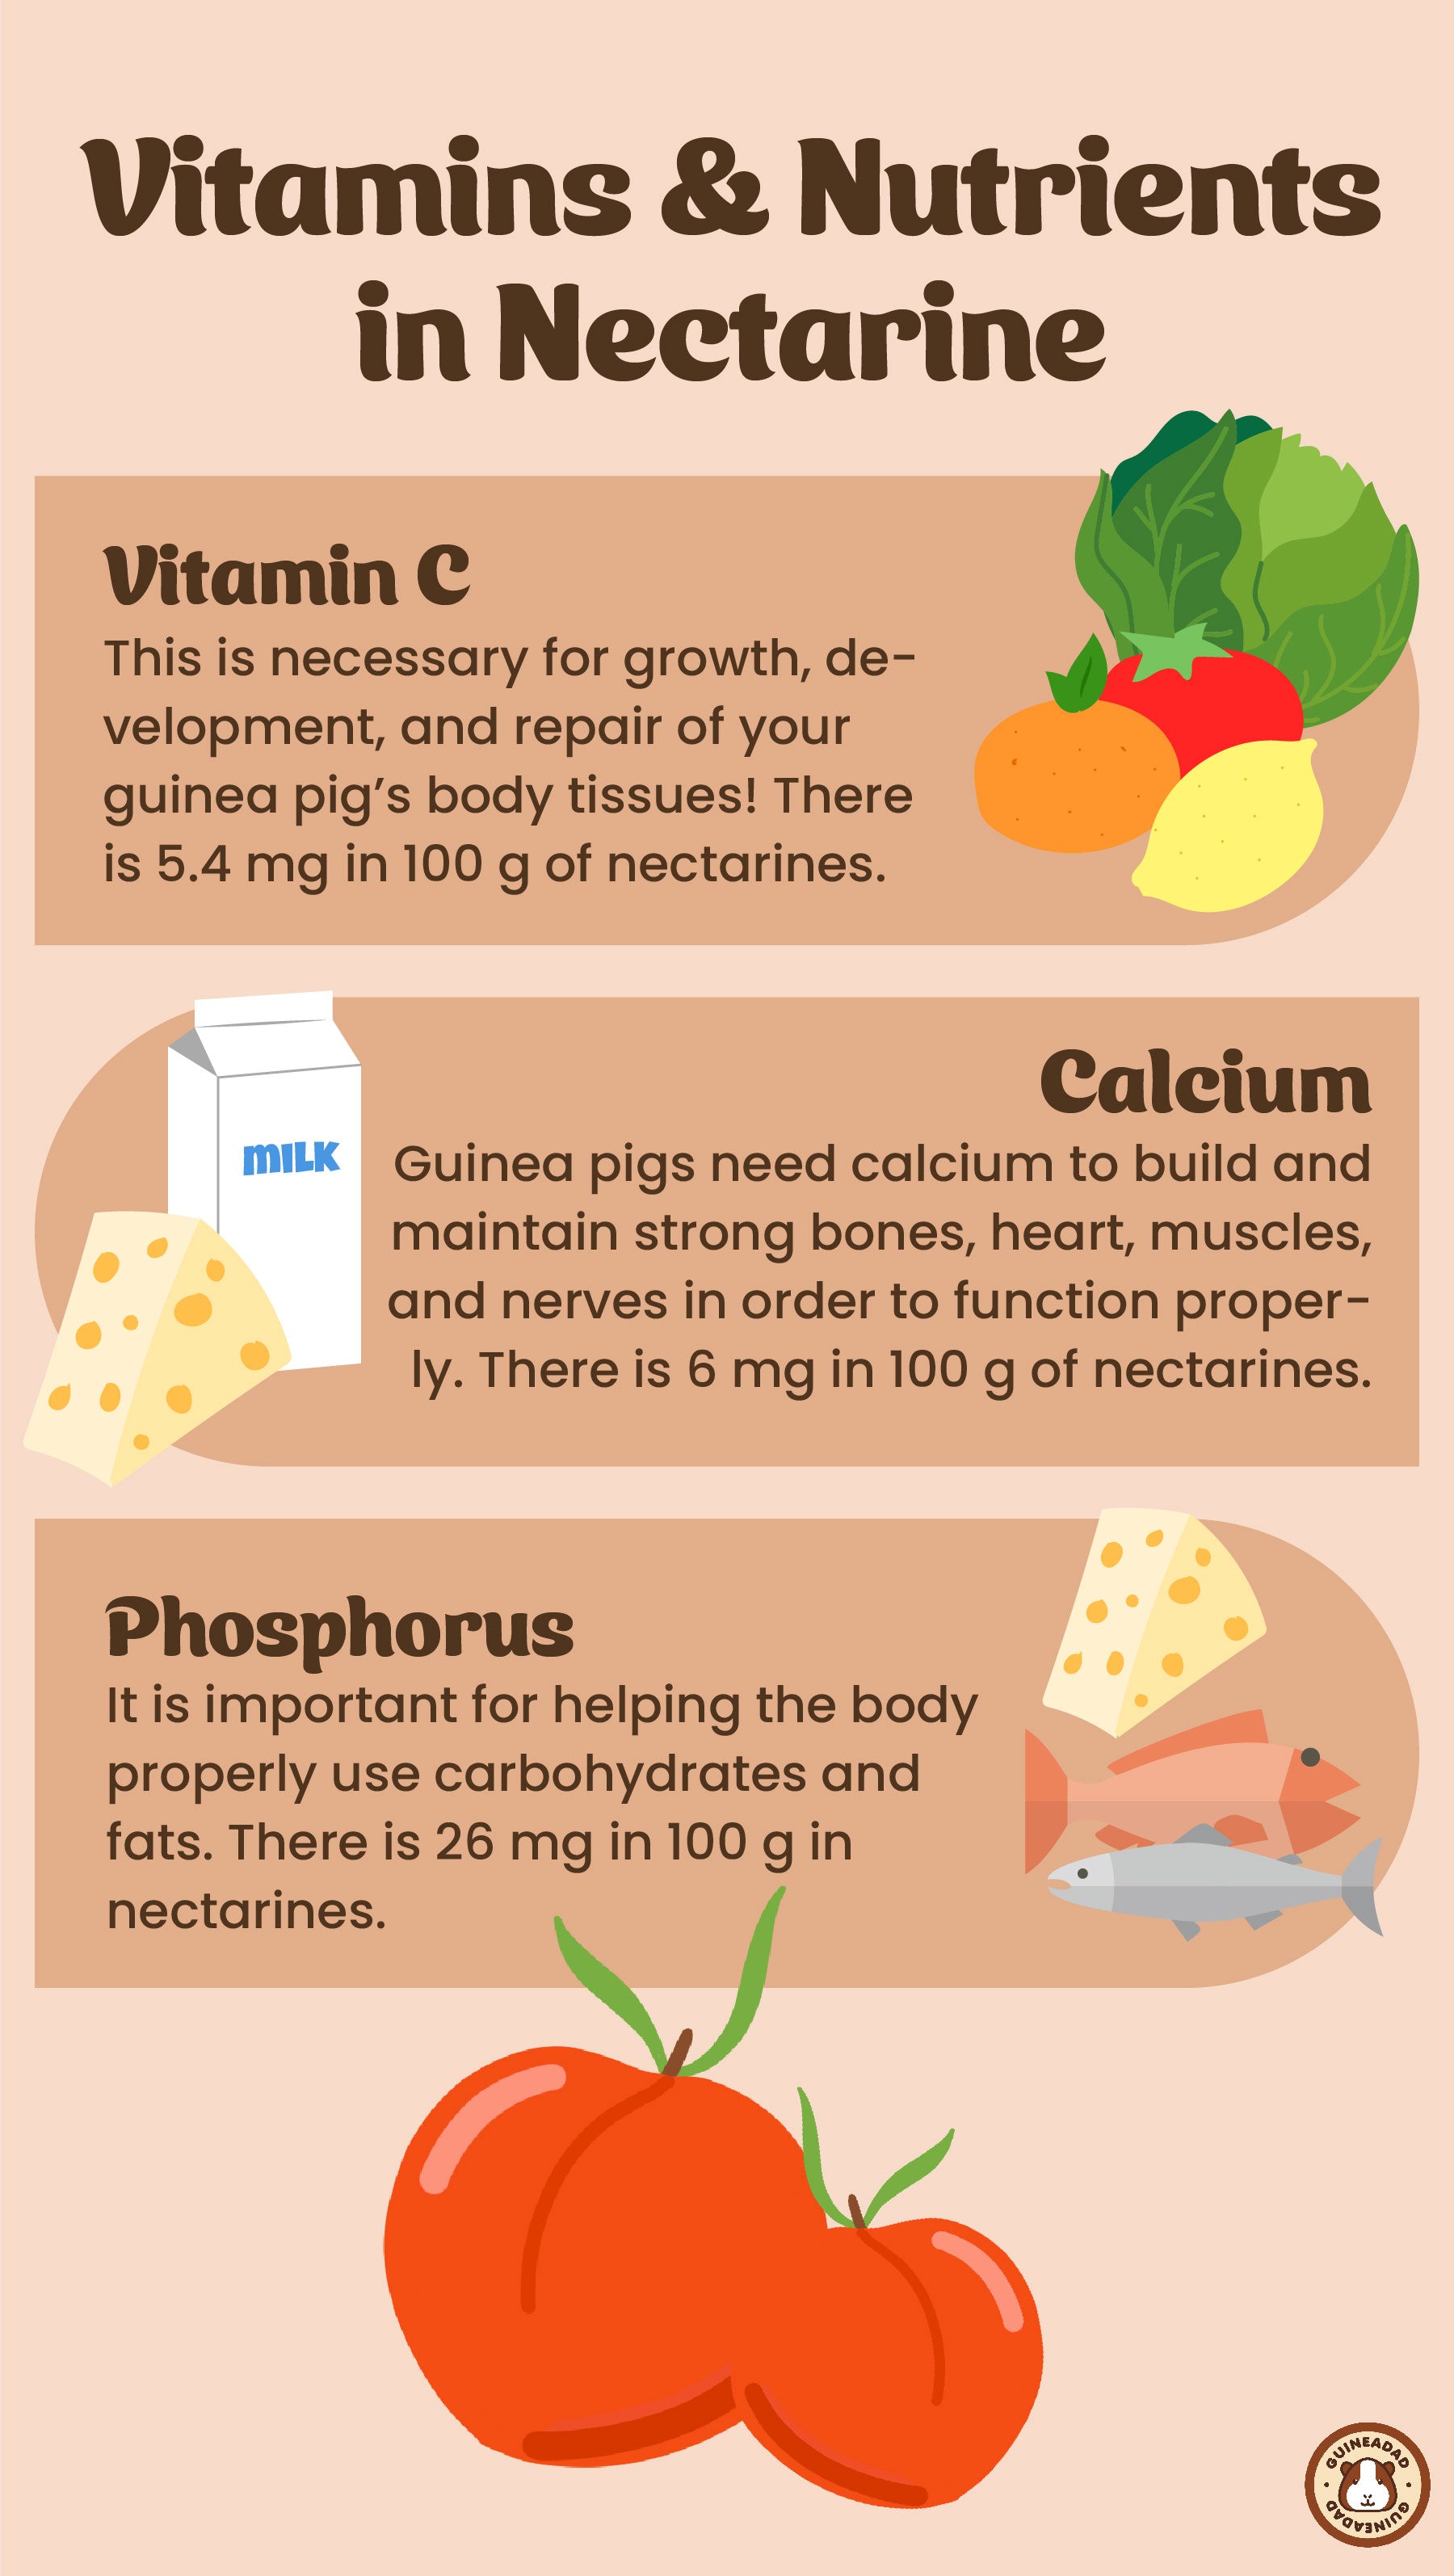 Infographic displaying the vitamins and nutrients in nectarines for guinea pigs